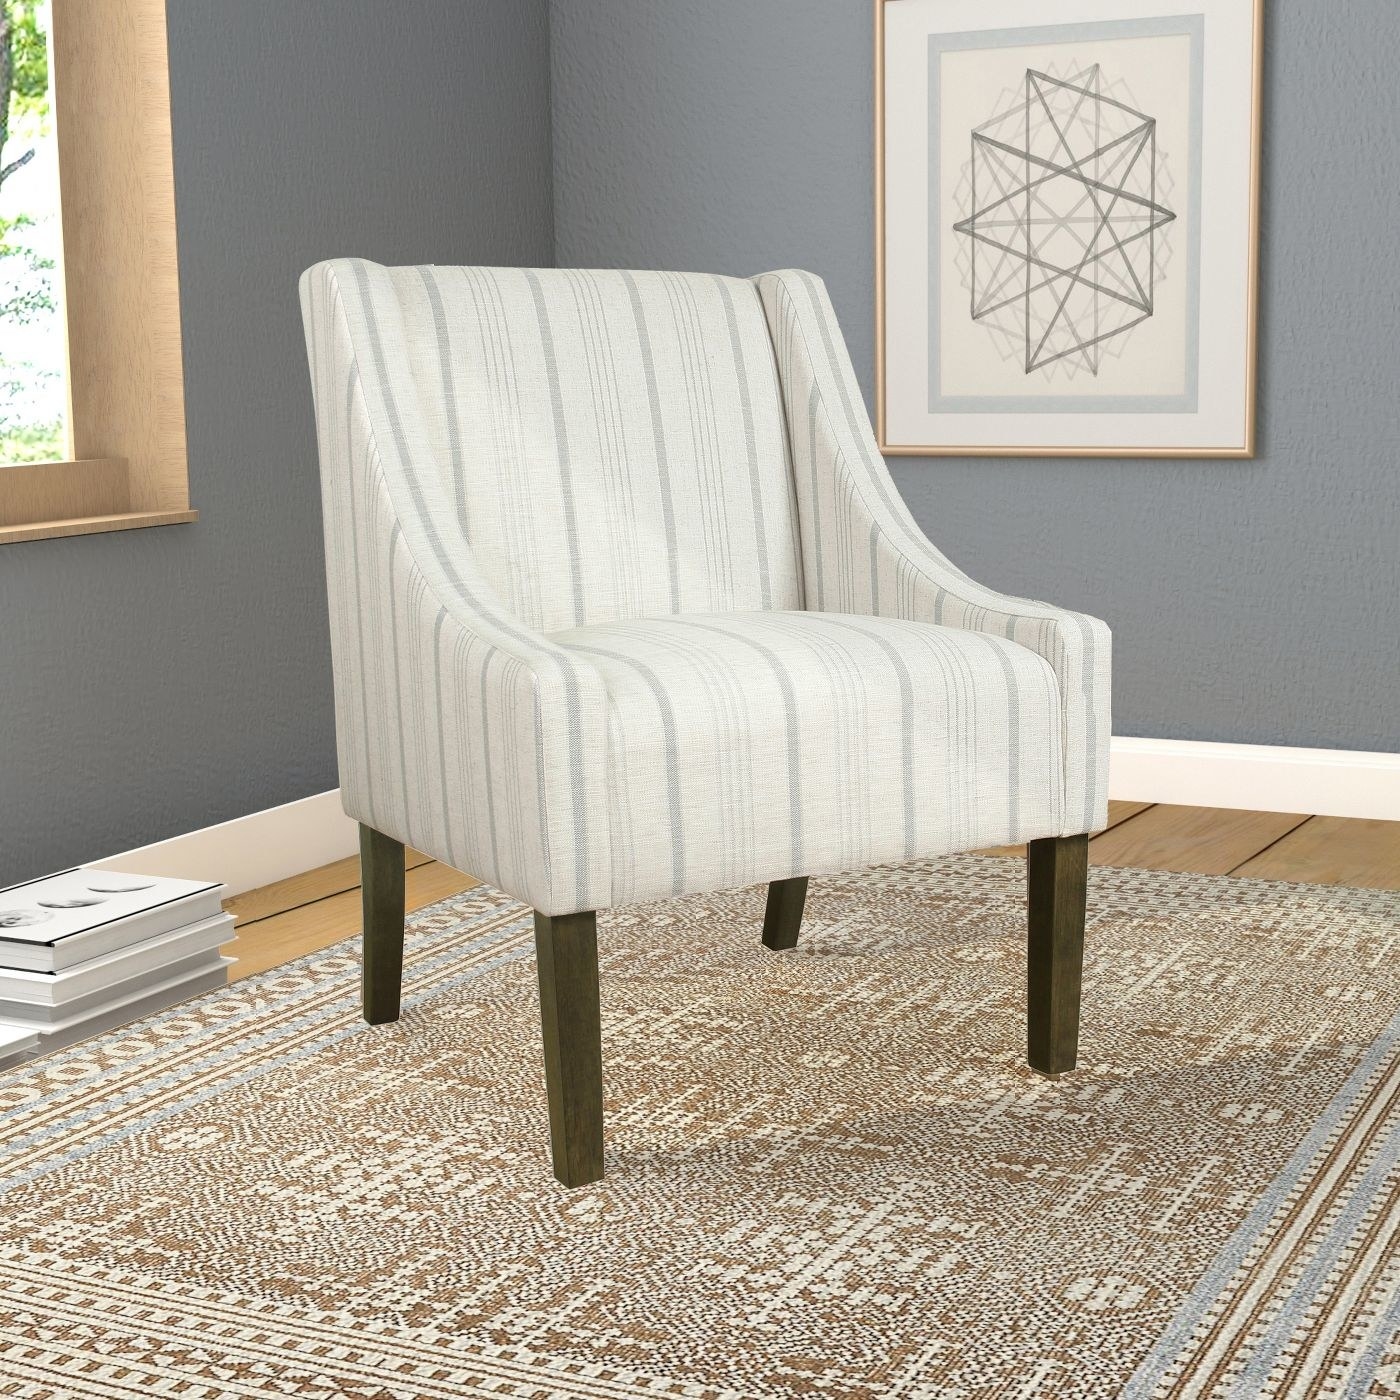 gray and white striped swoop armchair with wood legs on a patterned rug